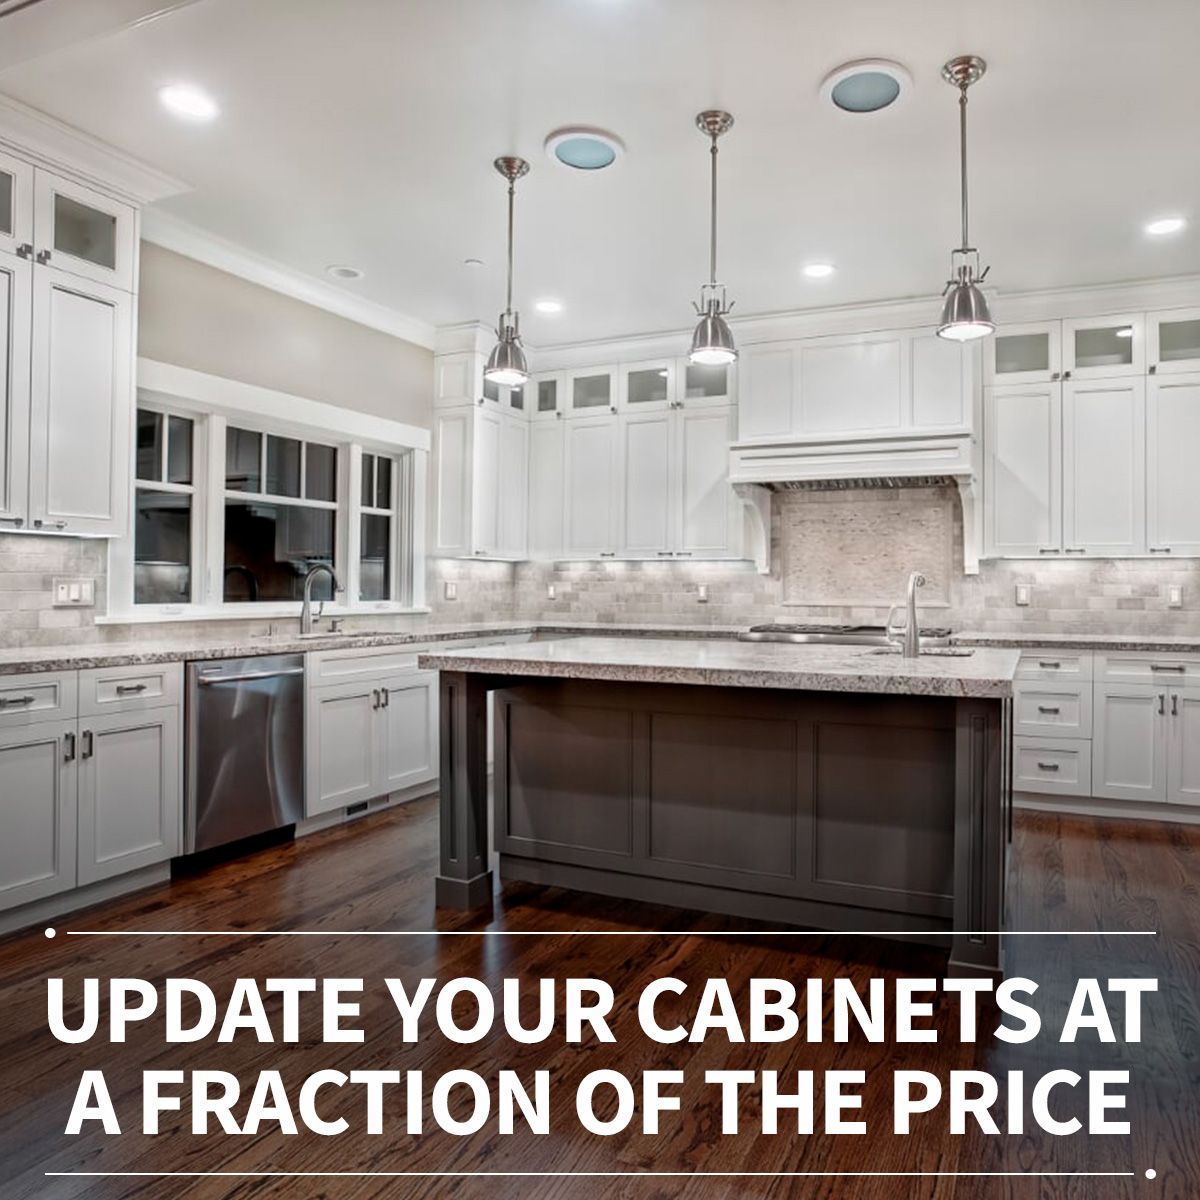 Update Your Cabinets At A Fraction Of The Price